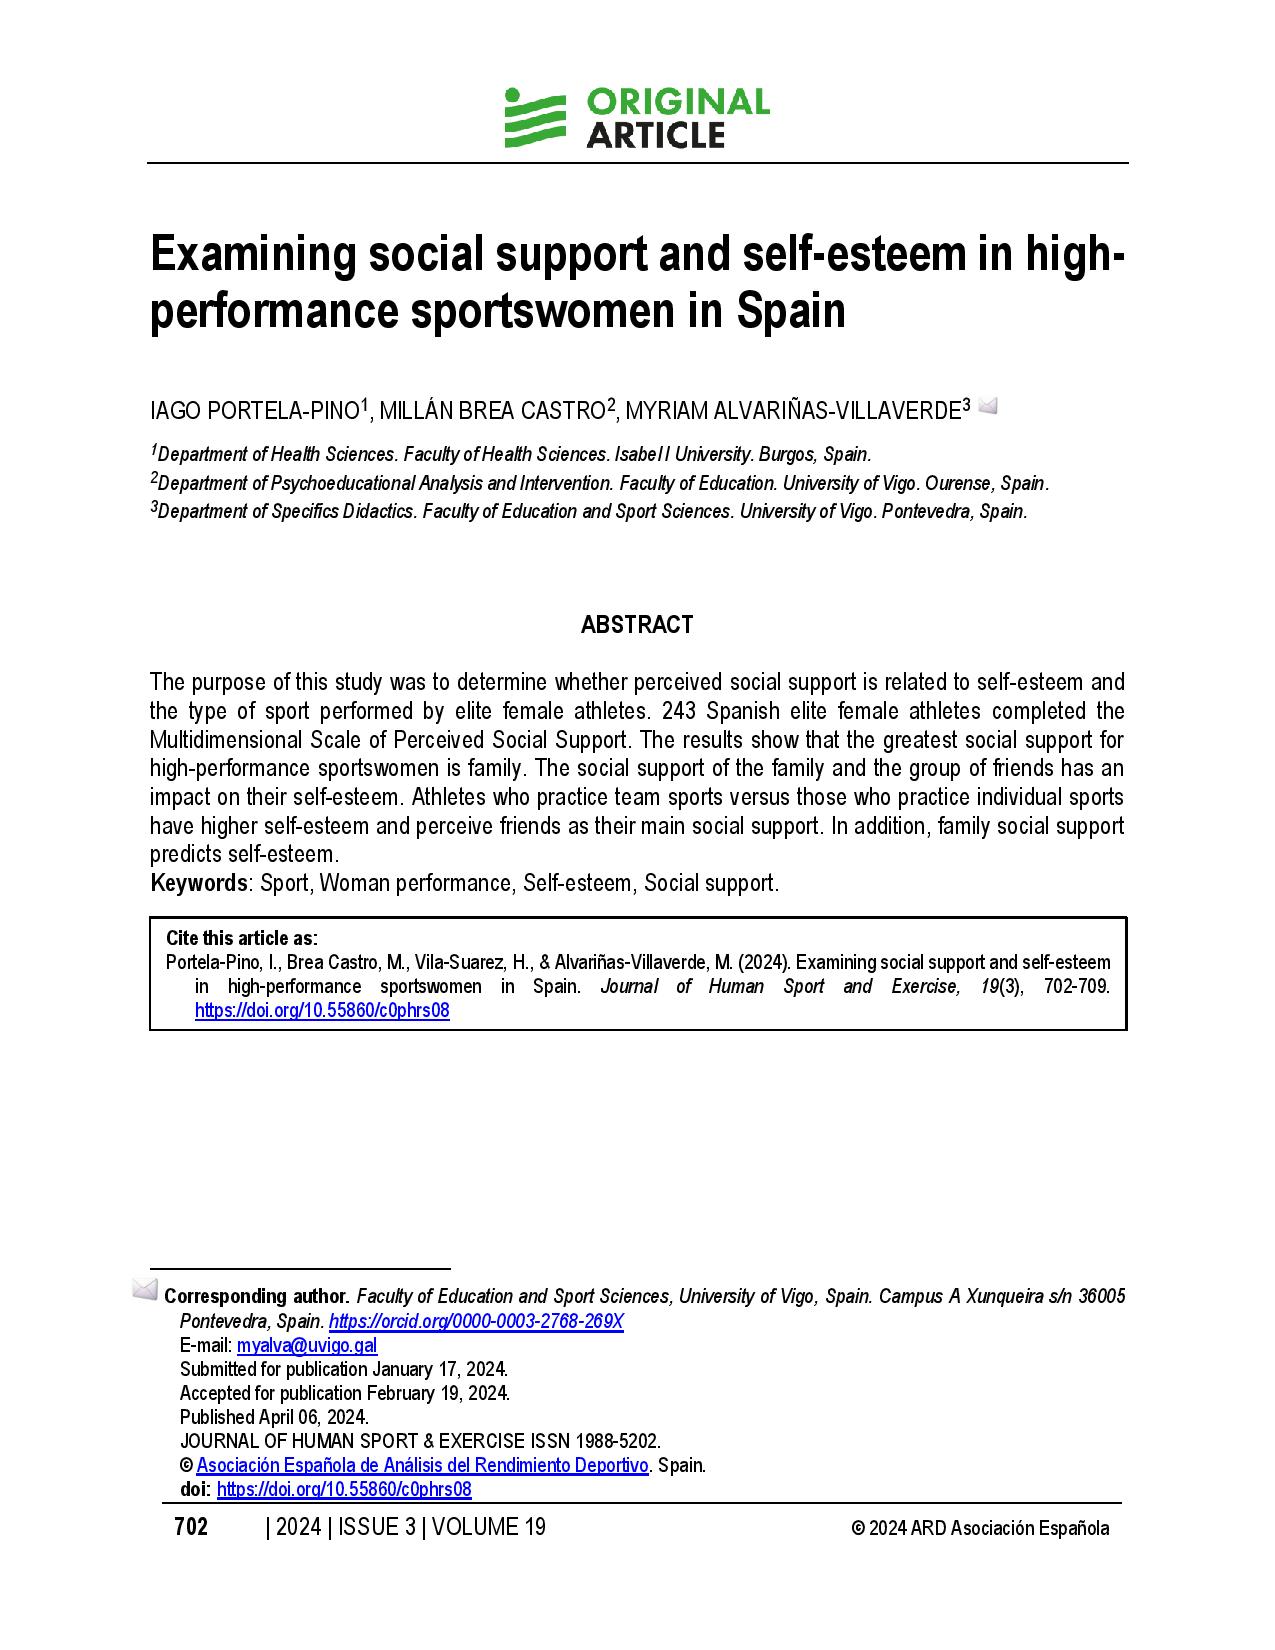 Examining social support and self-esteem in high-performance sportswomen in Spain